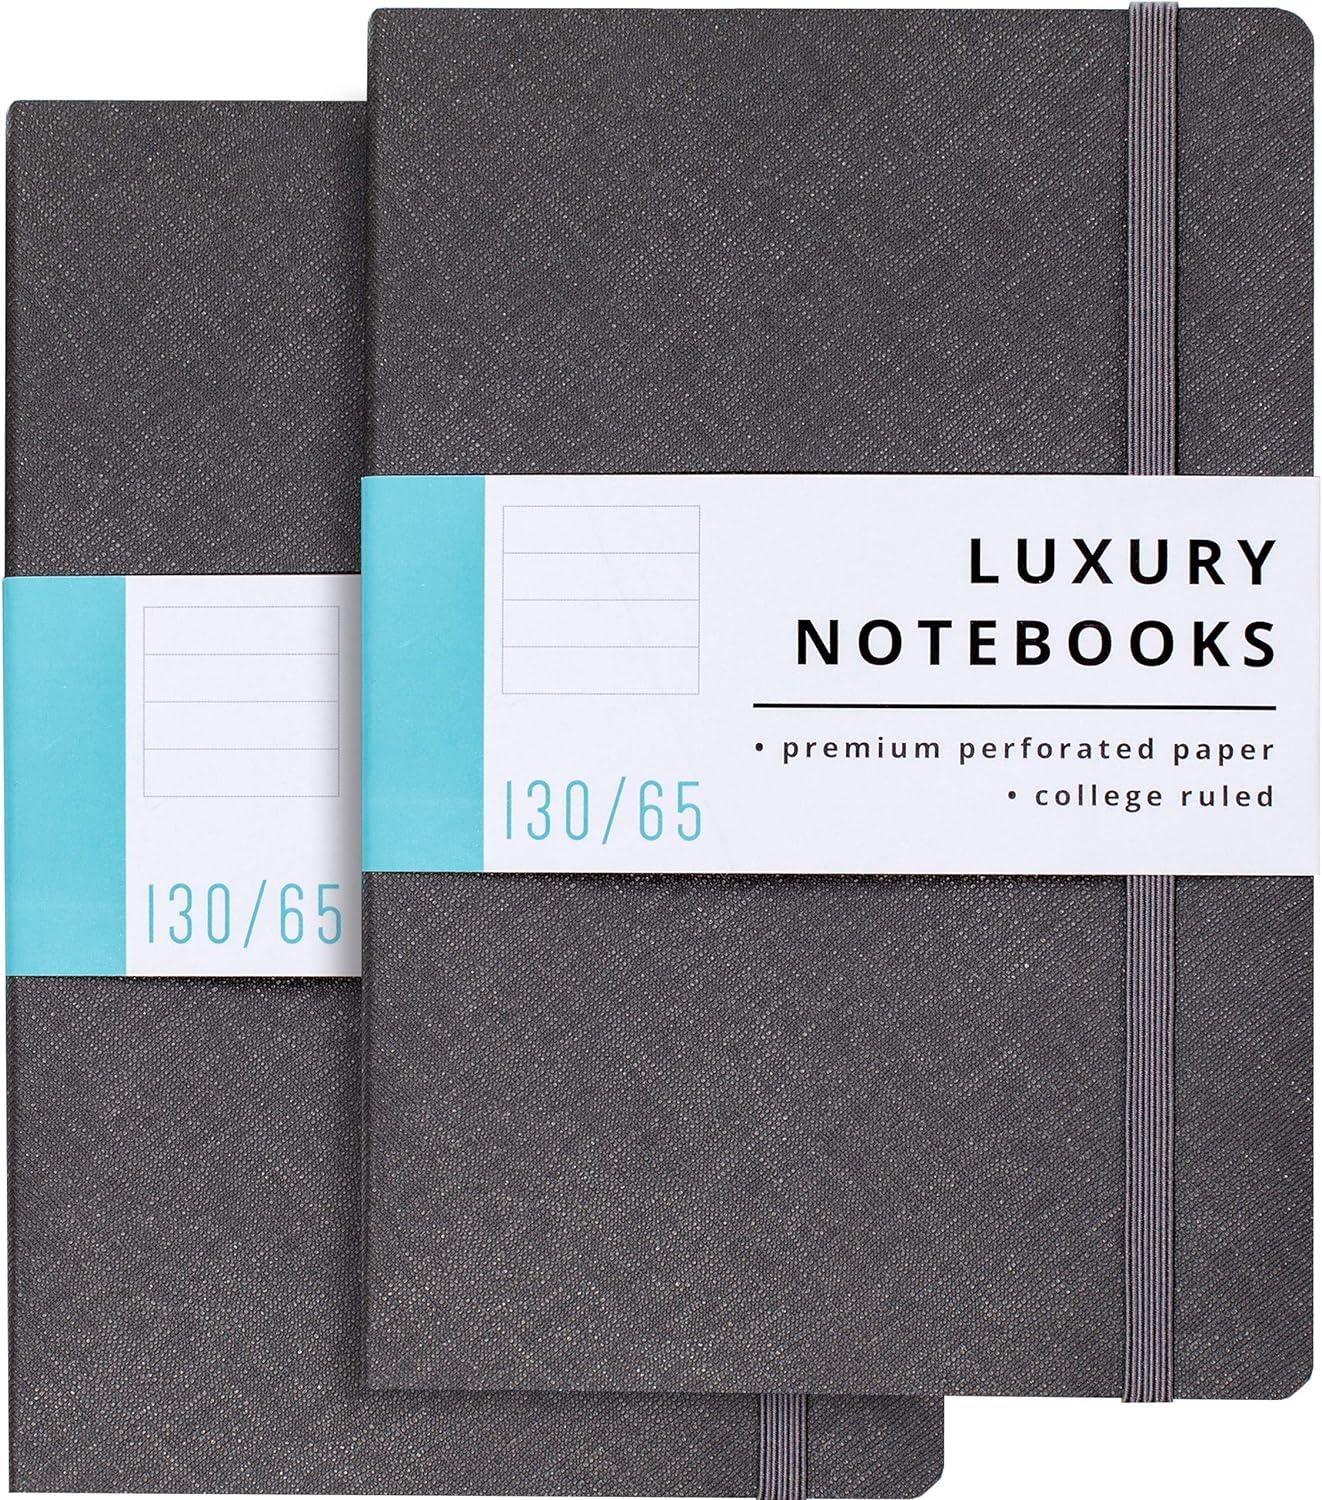 papercode journal notebook - luxury notebooks w/ 130 perforated lined pages - writing journals for work and